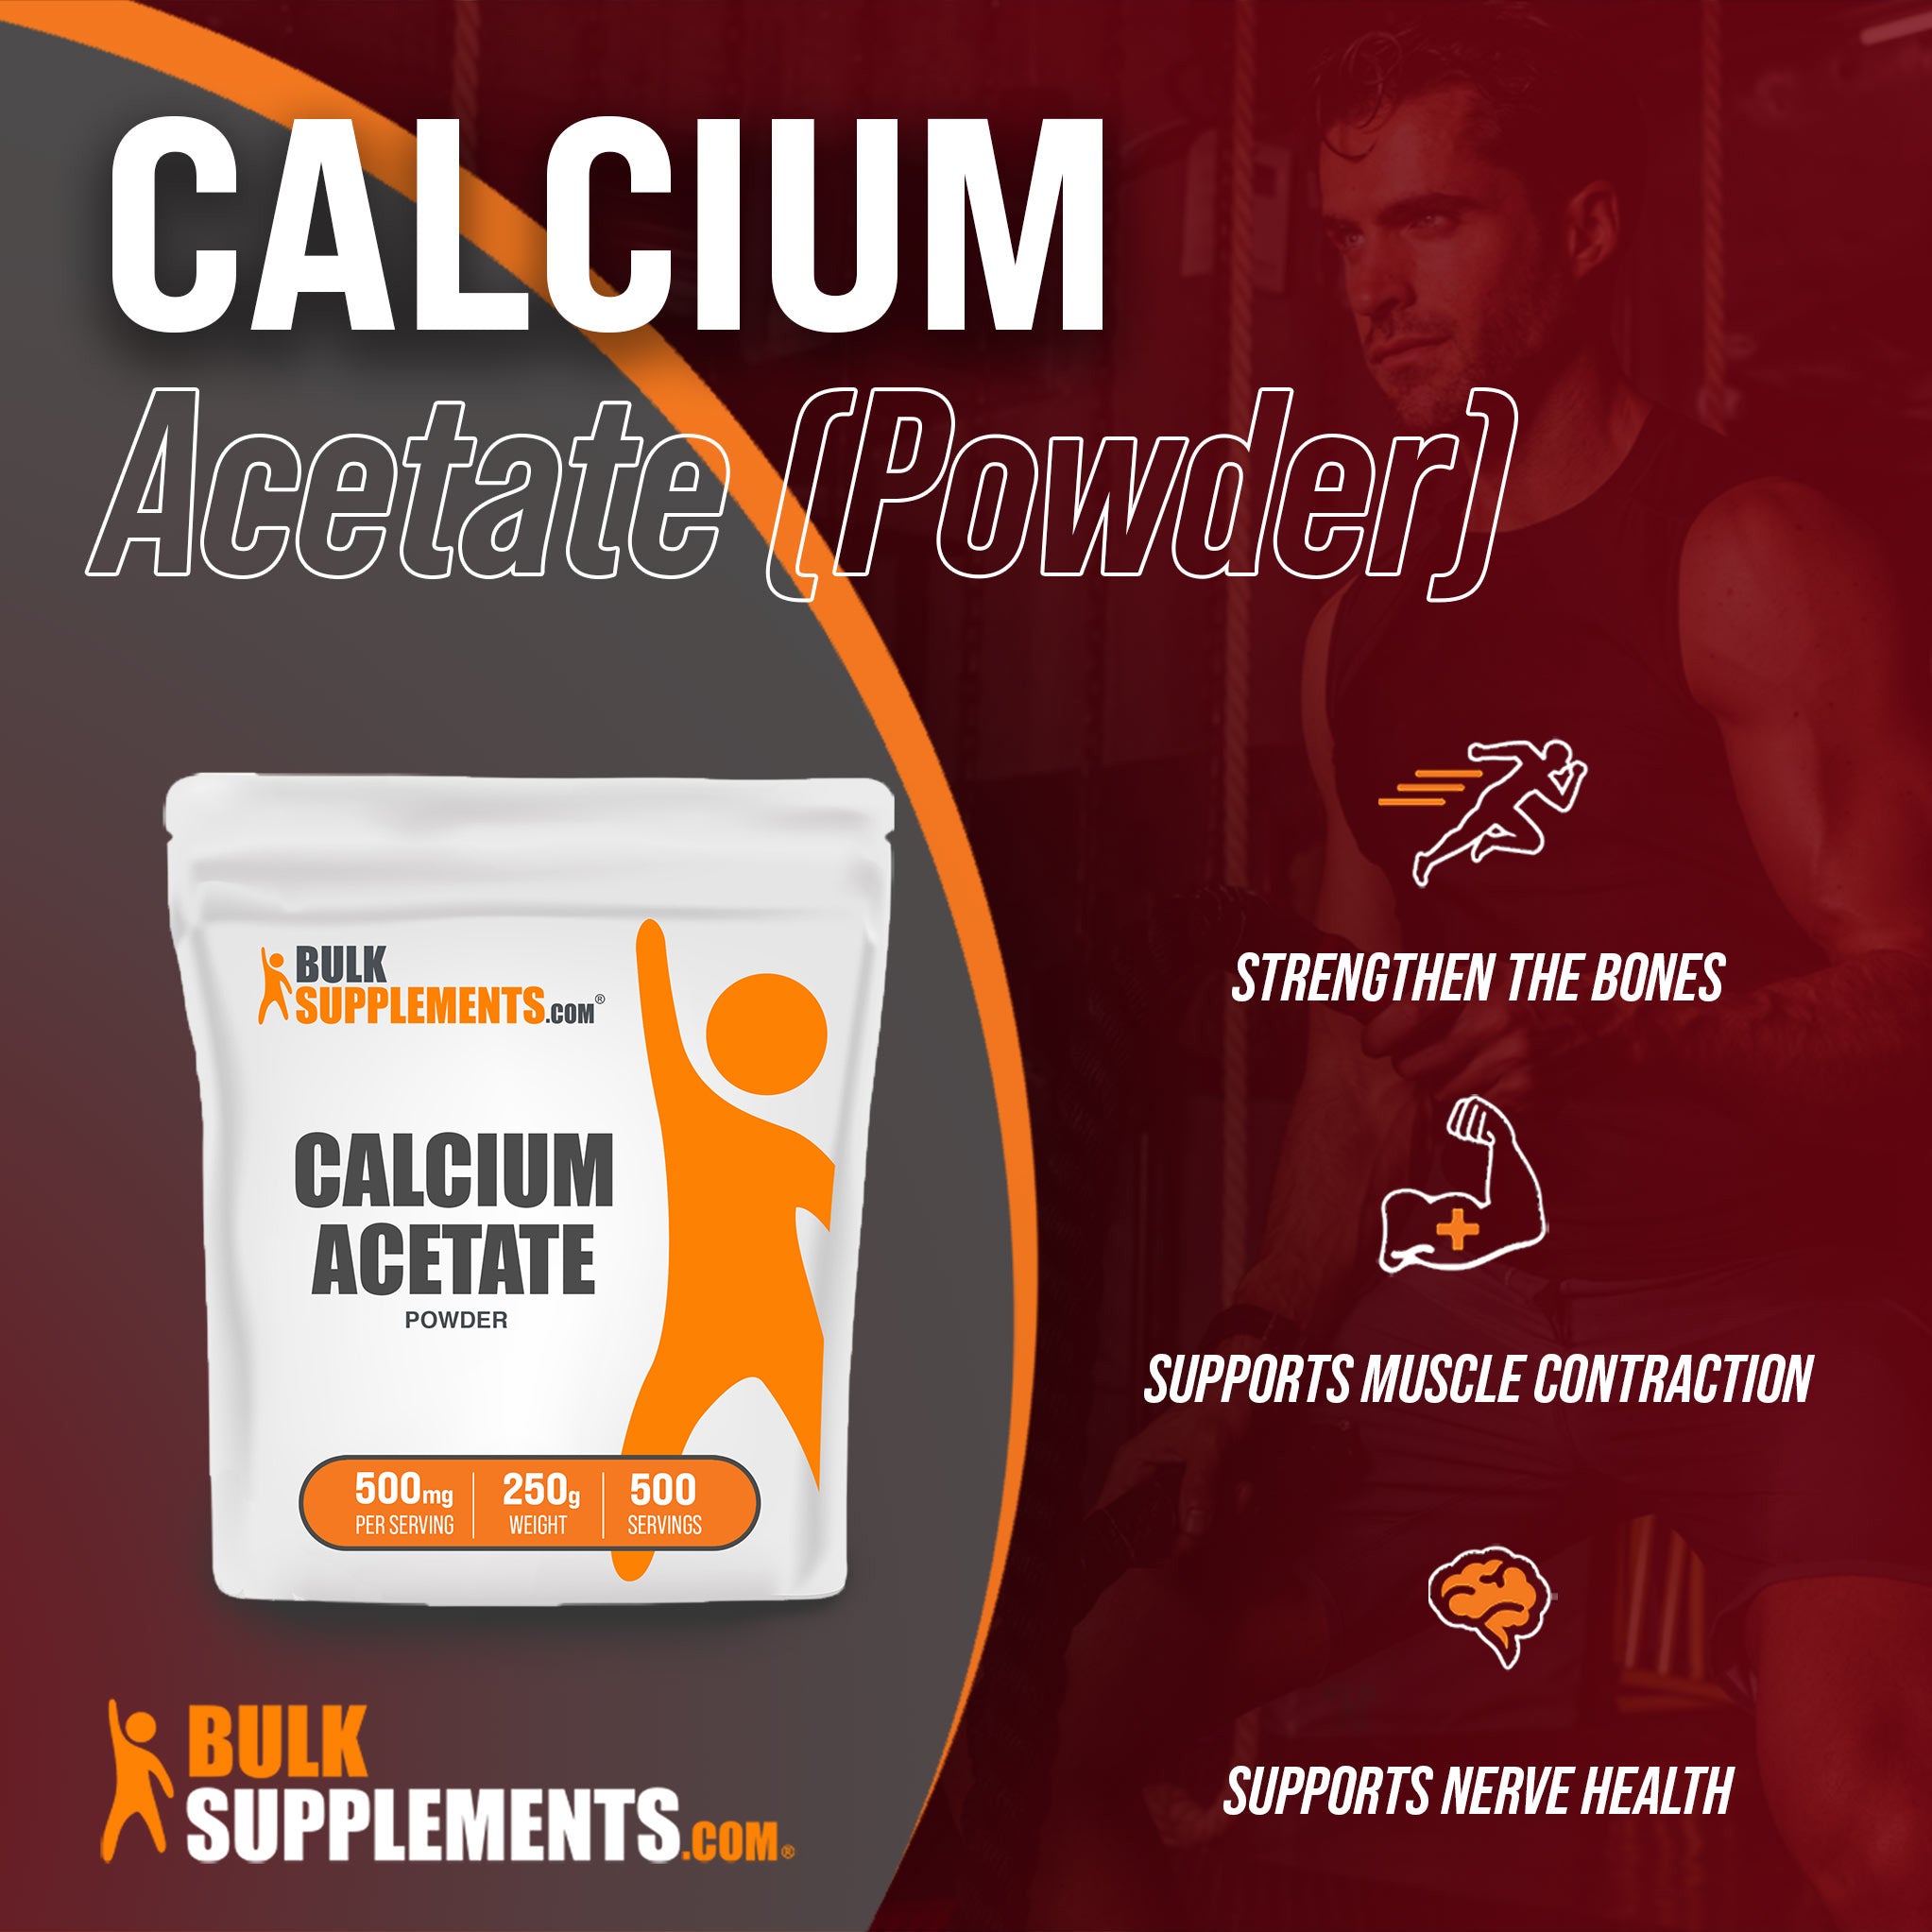 Benefits of our 250g Calcium Supplement; strengthens the bones, supports muscle contraction, supports nerve health